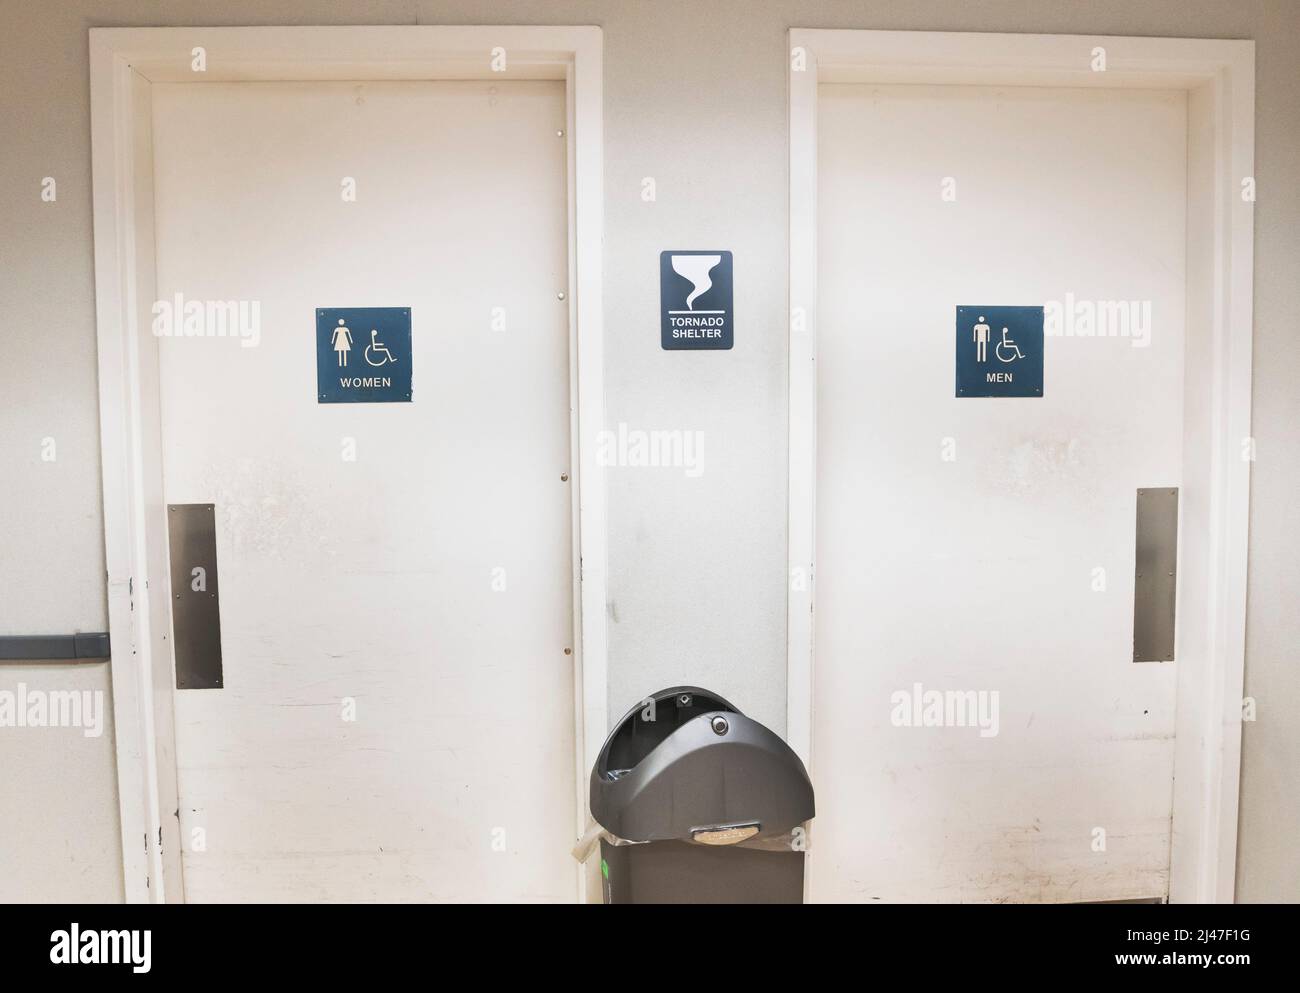 A Tornado Shelter sign between a men's and women's bathroom doors inside a retail store in North Central Florida. Stock Photo